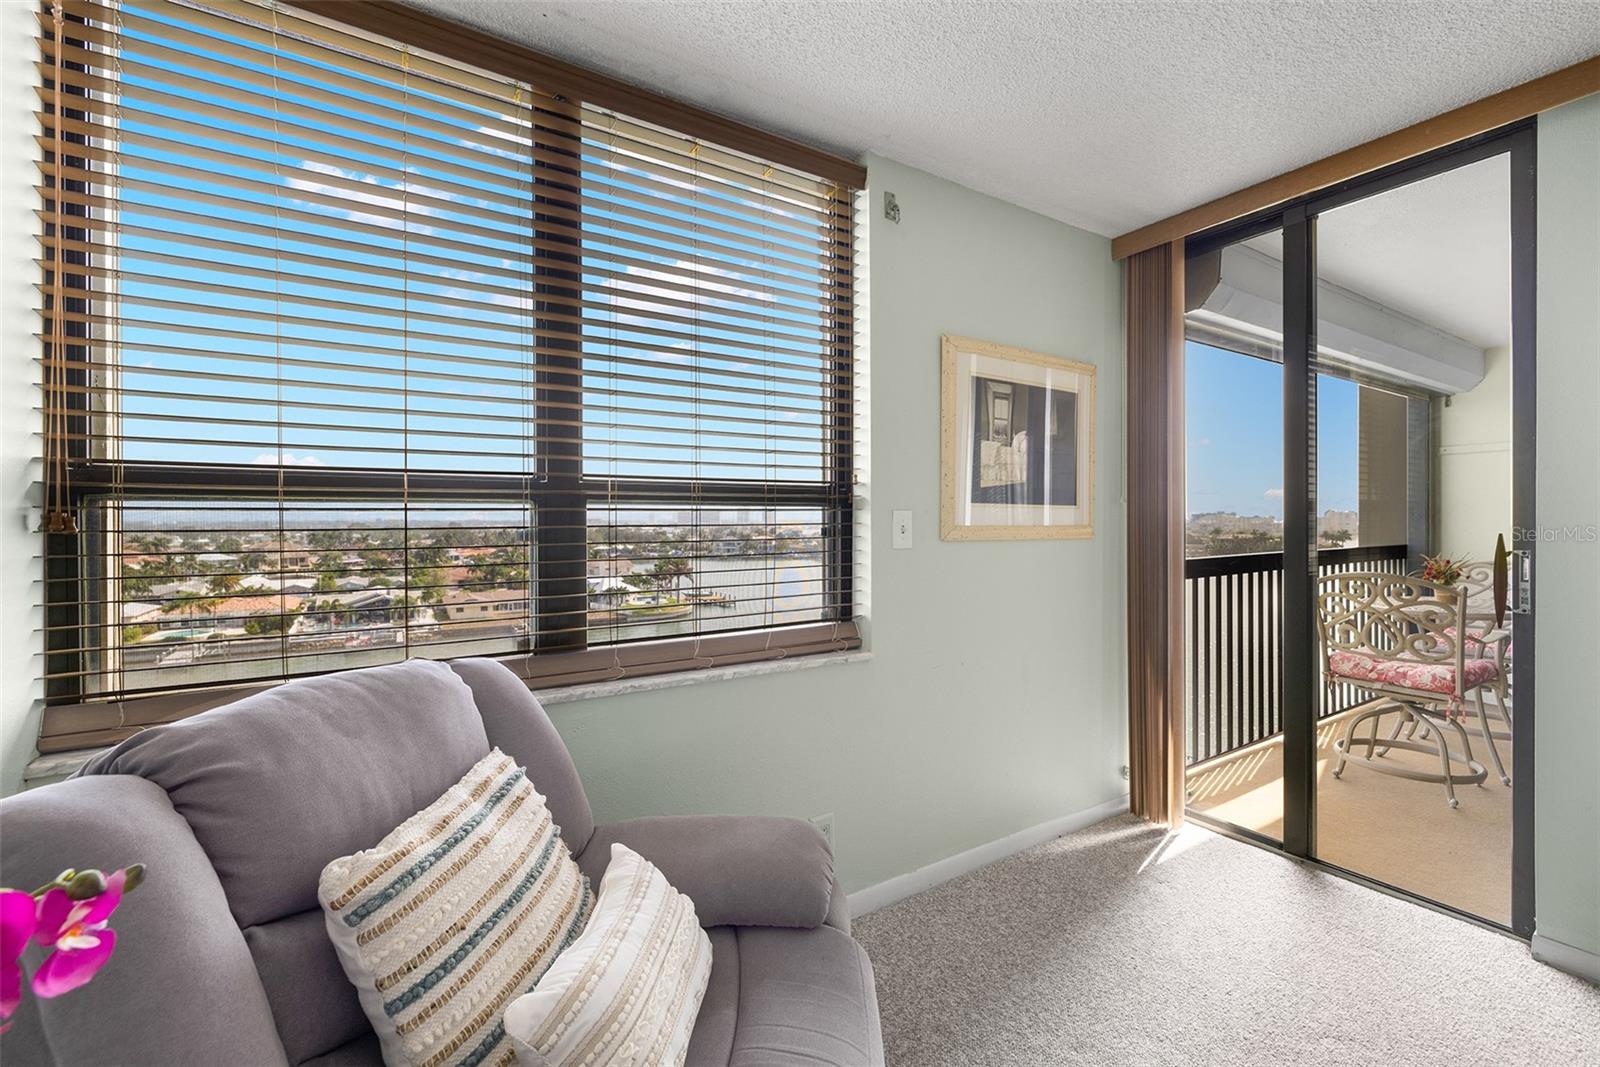 Wonderful natural light comes into the primary bedroom with a door to the balcony